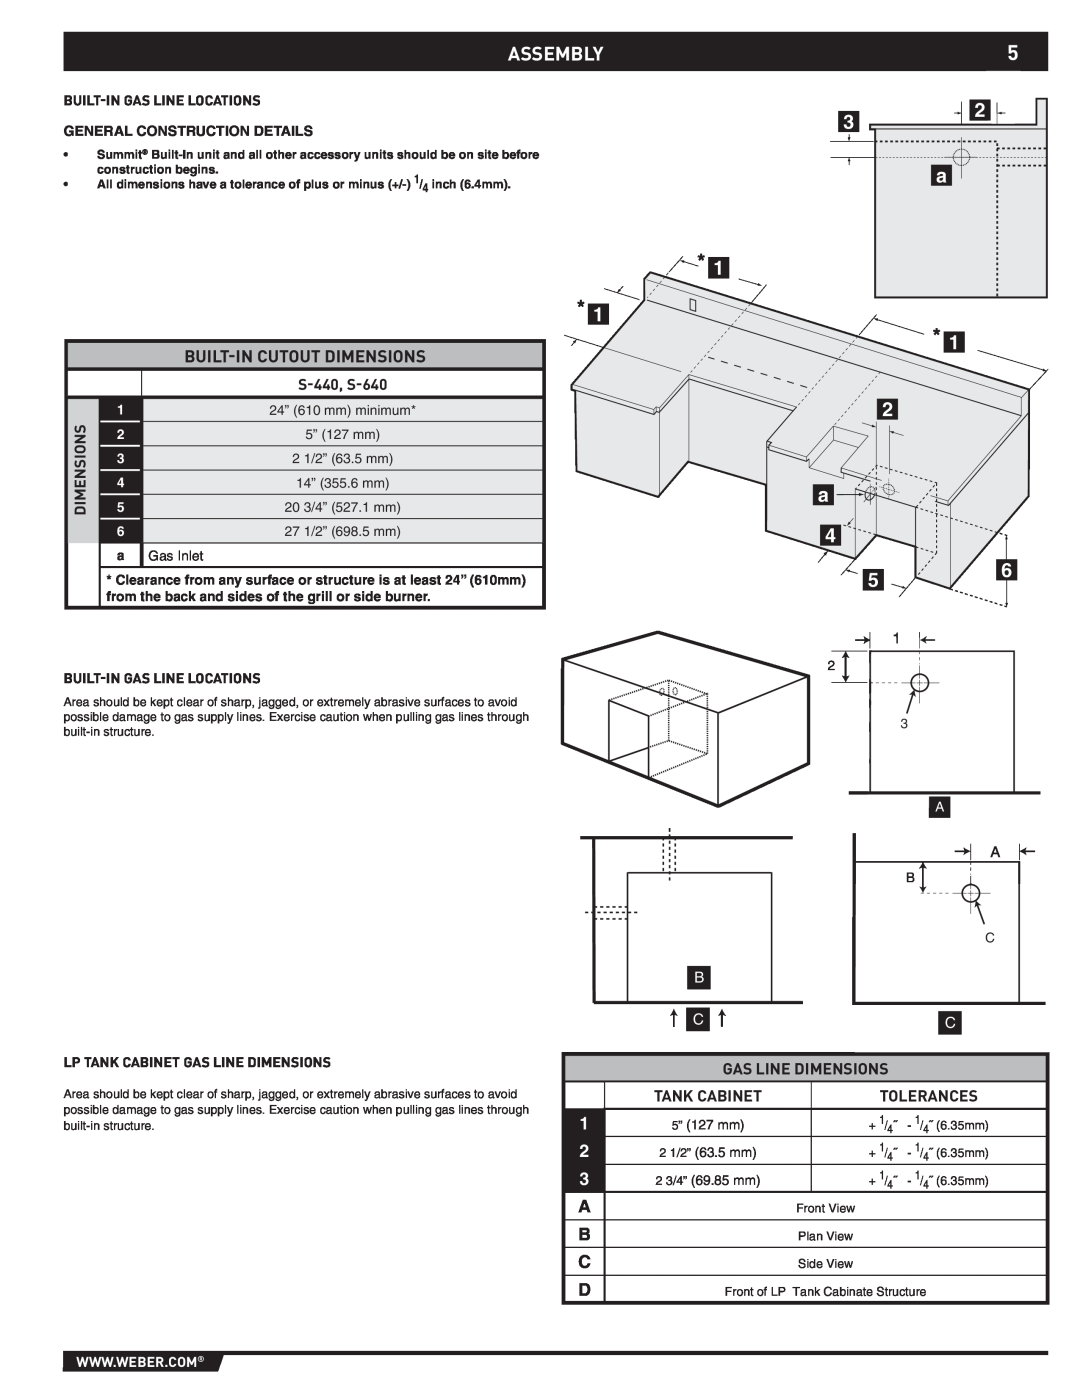 Summit 43176 Assembly, 2 a, Built-Incutout Dimensions, Built-Ingas Line Locations, General Construction Details, 5” 127 mm 